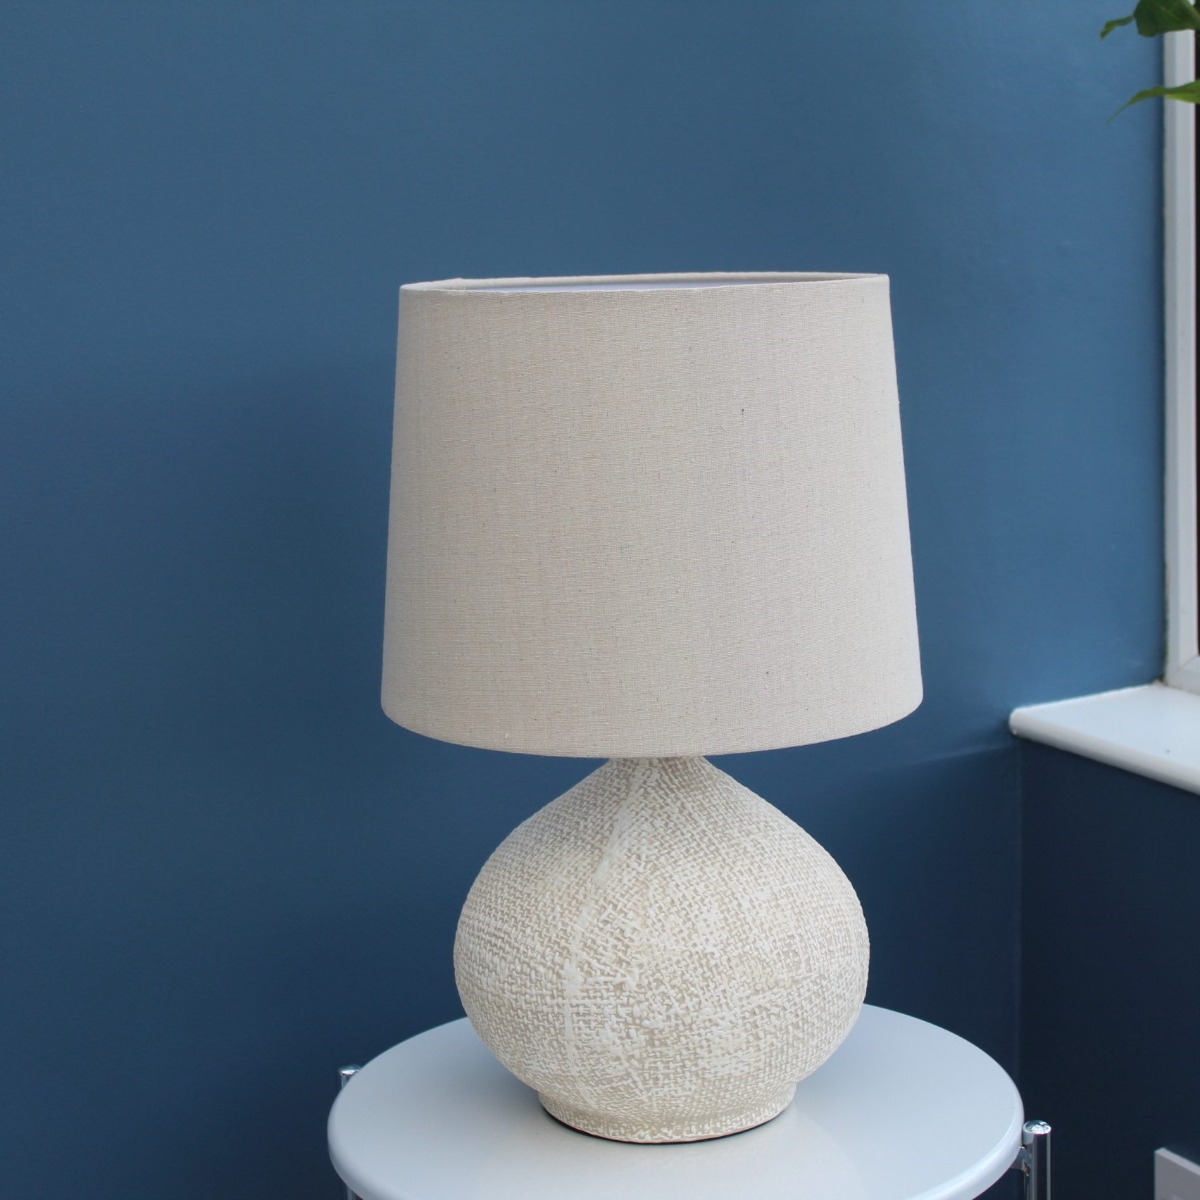 Woven Pattern Round Ceramic Beige Table Lamp